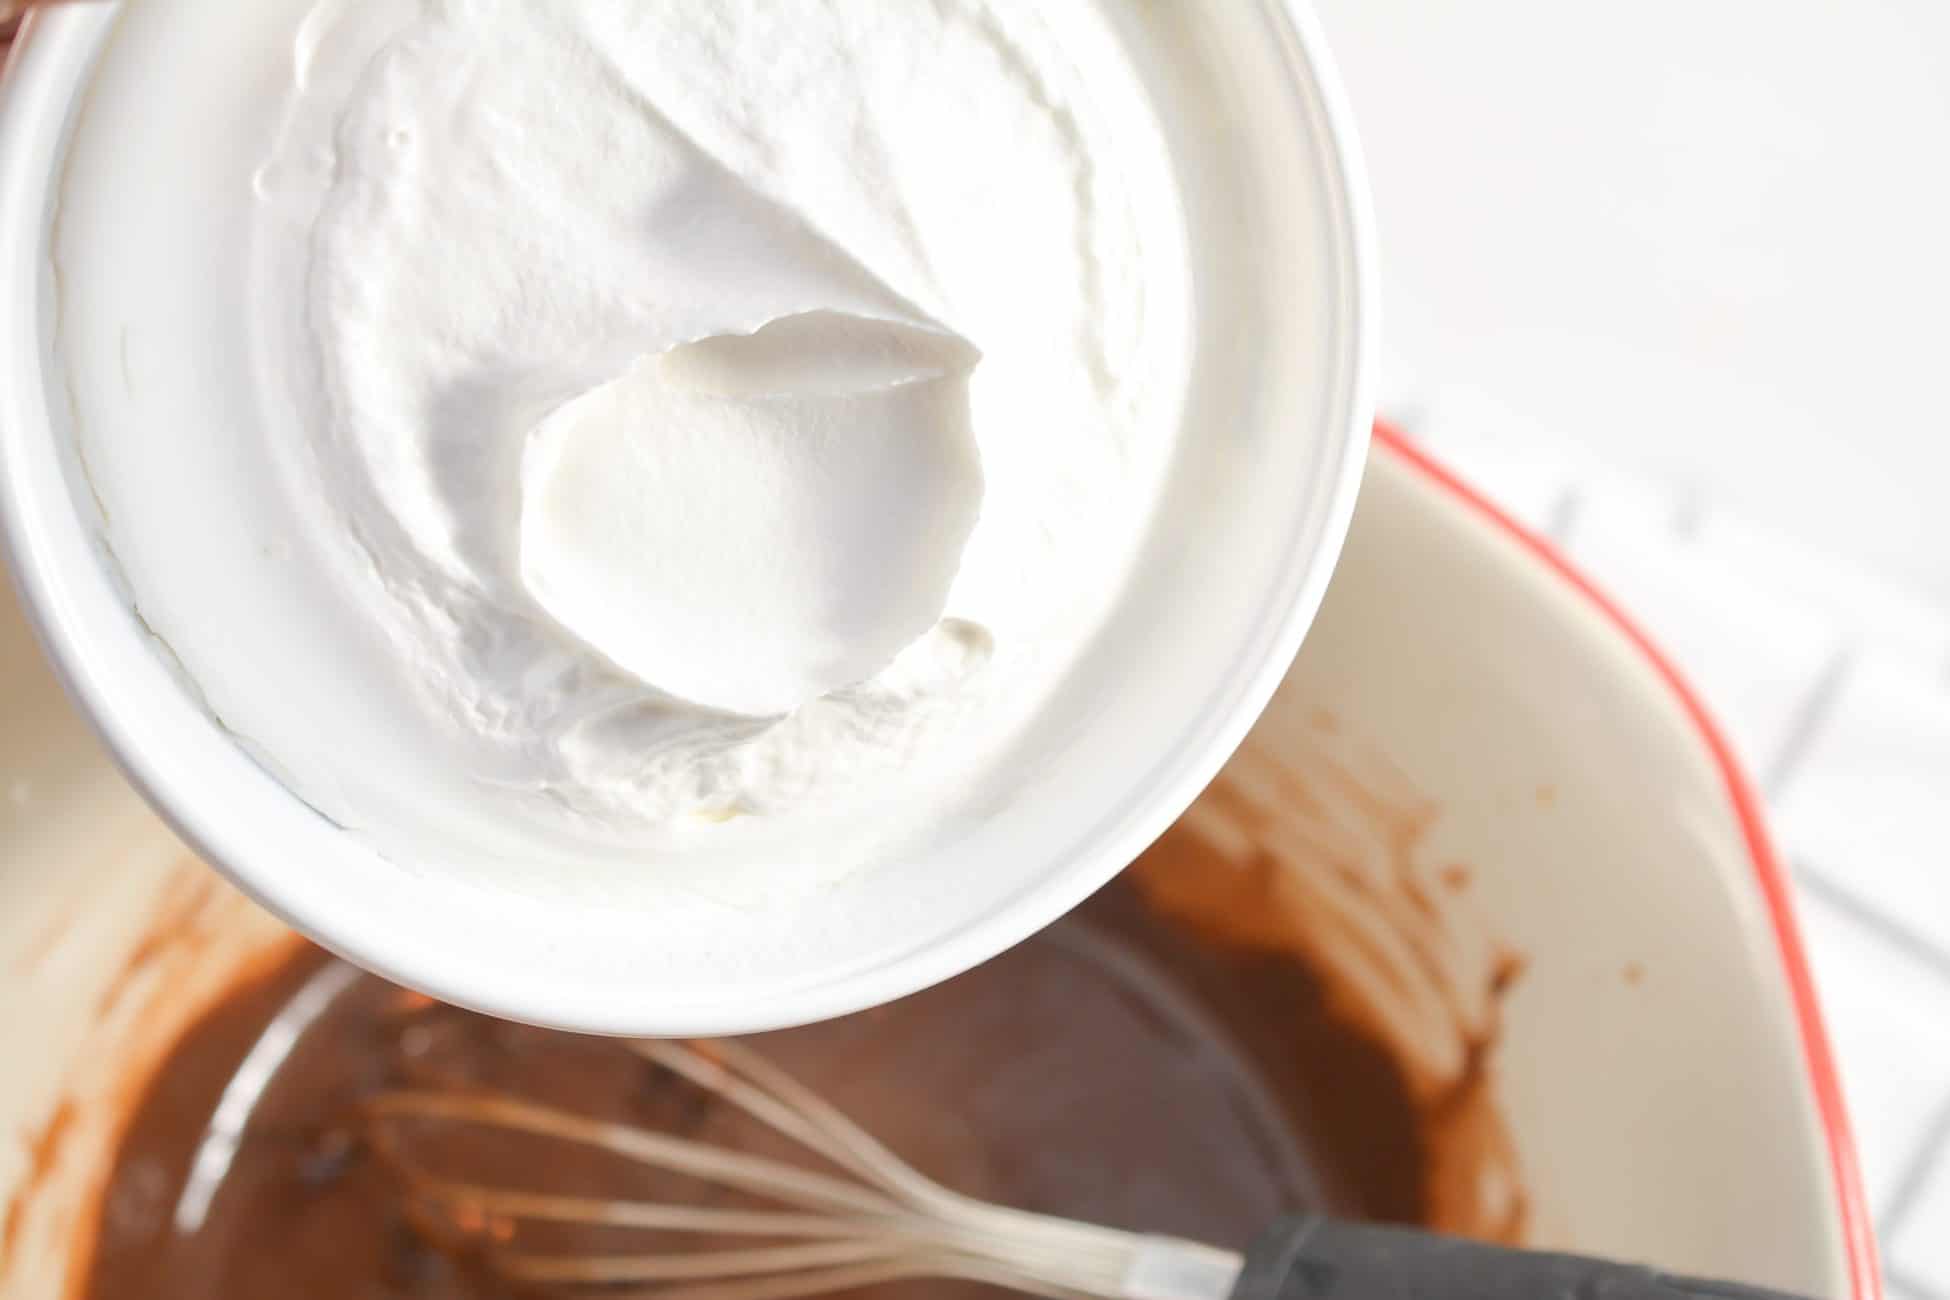 add 8 oz. Cool whip thawed and a box of chocolate pudding mix.